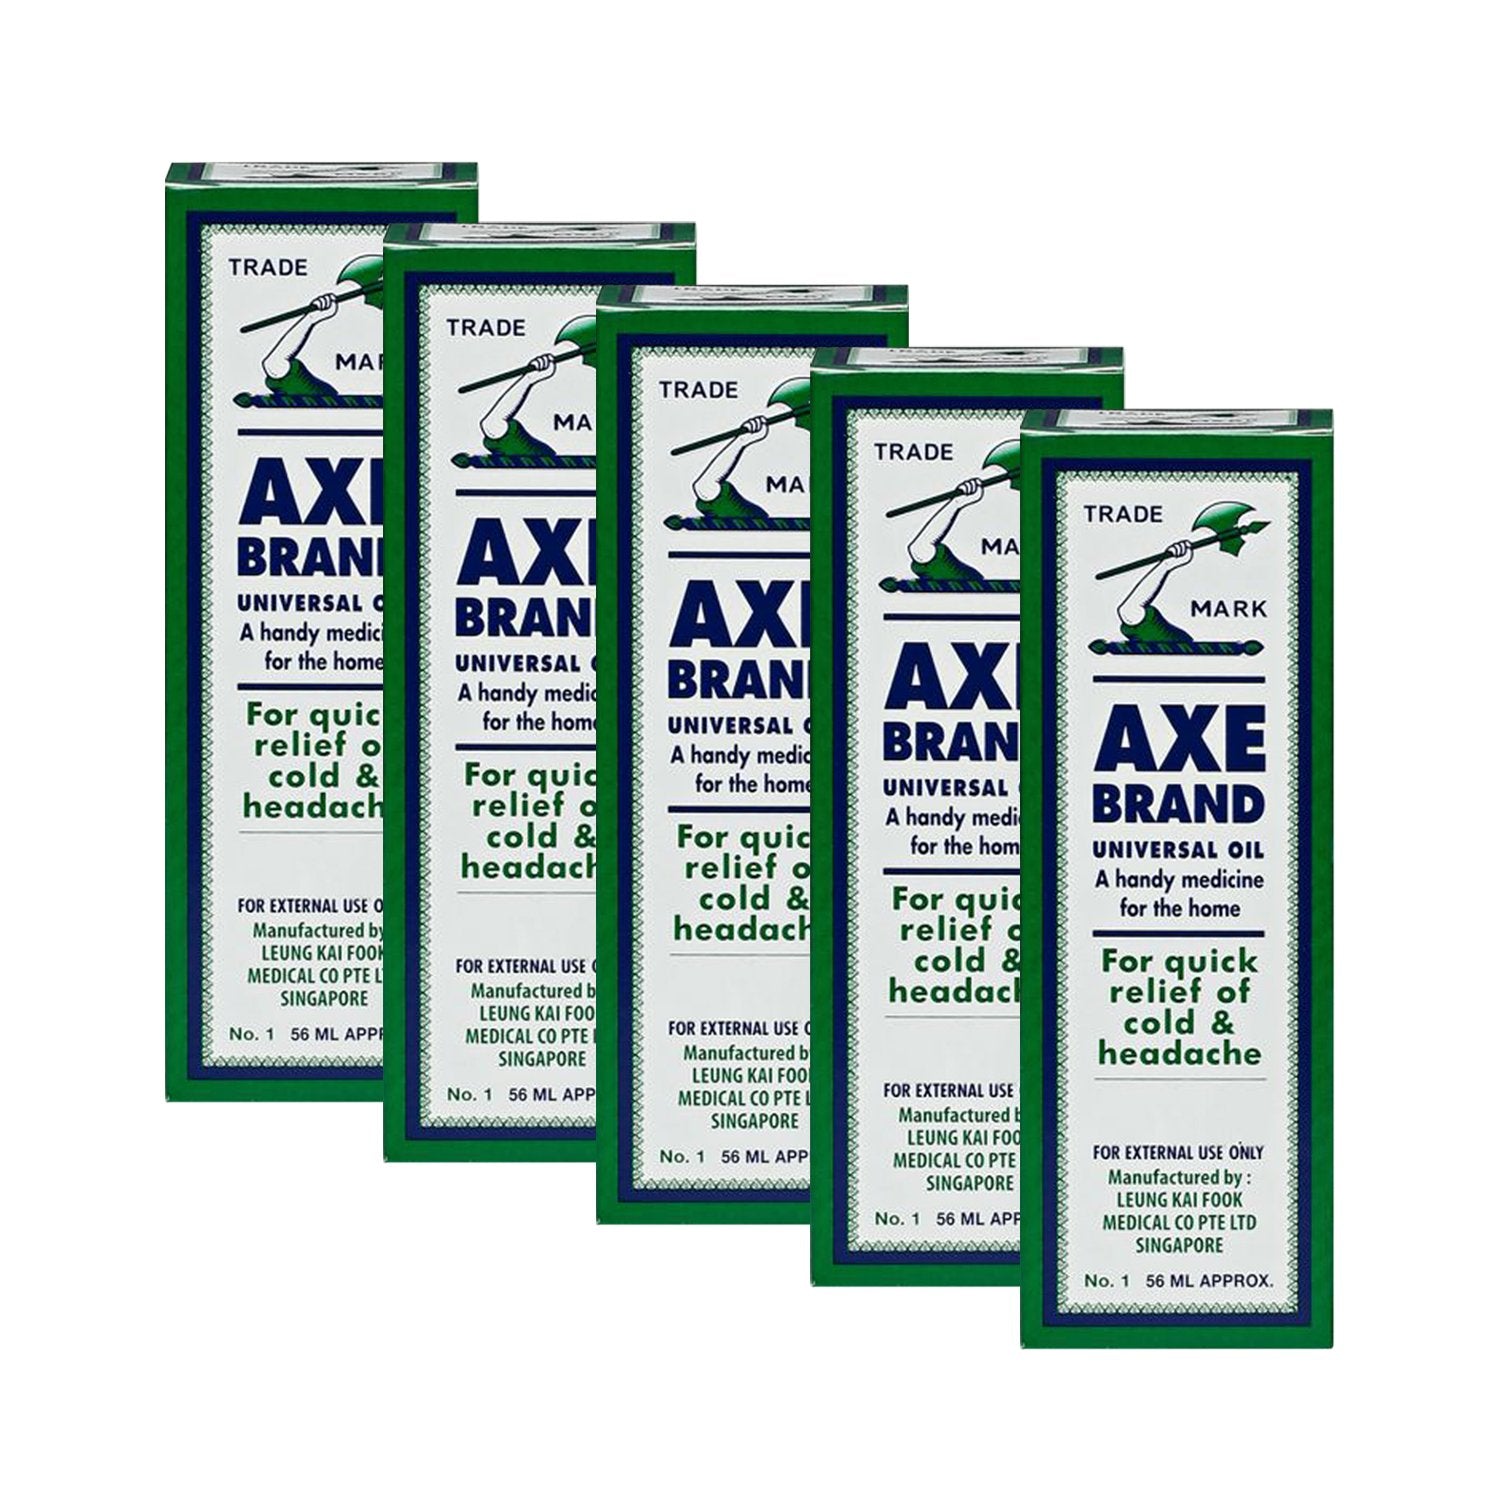 AXE Universal Medicated Oil for Quick Relief of Cold and Headache - 56ml - Sabkhareedo.com